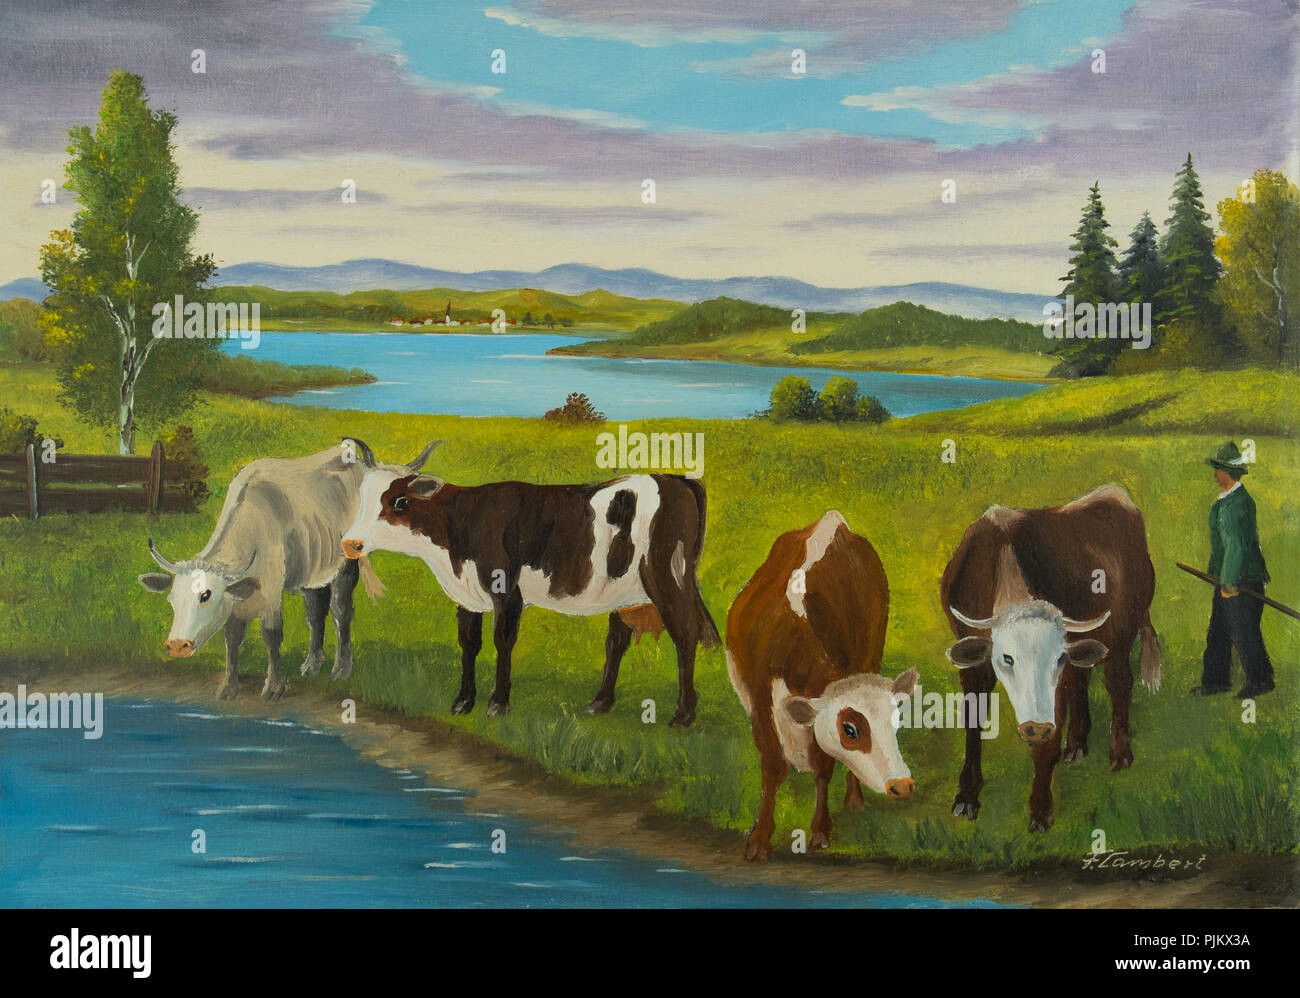 Painting with oil paints of different cows standing to drink at the water Stock Photo